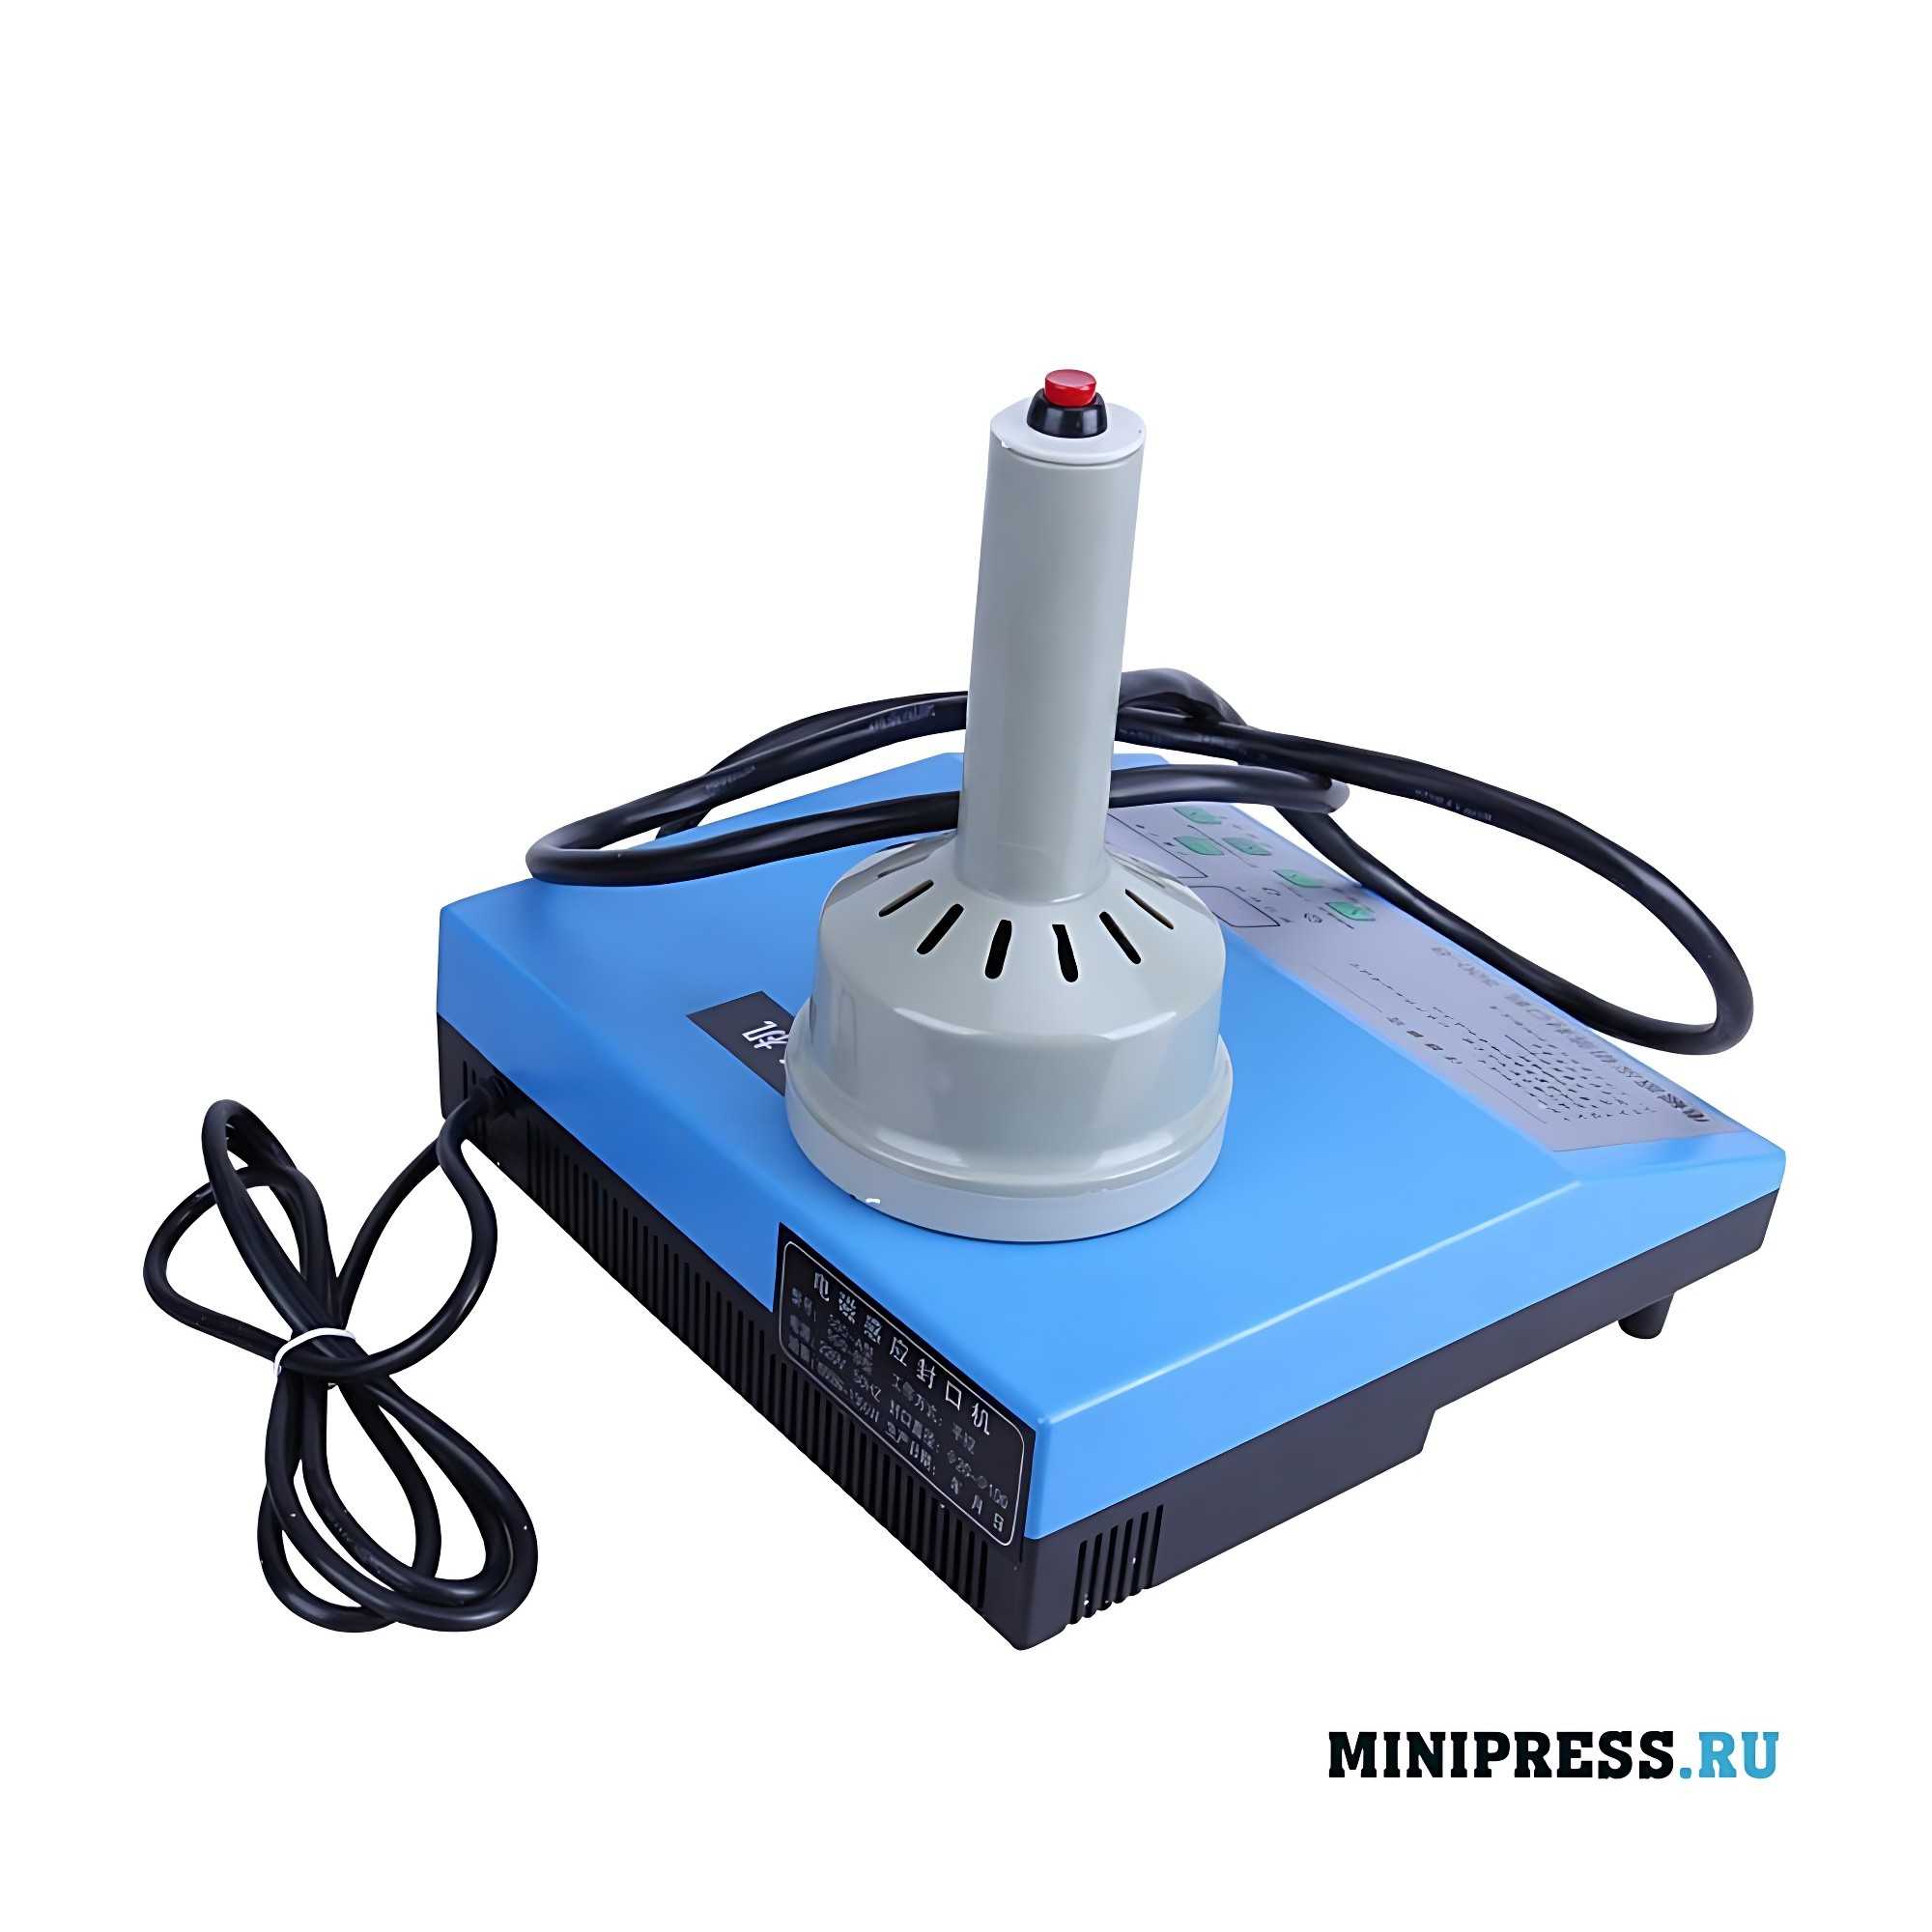 Equipment for electromagnetic induction sealing of the neck with aluminum foil GS 08